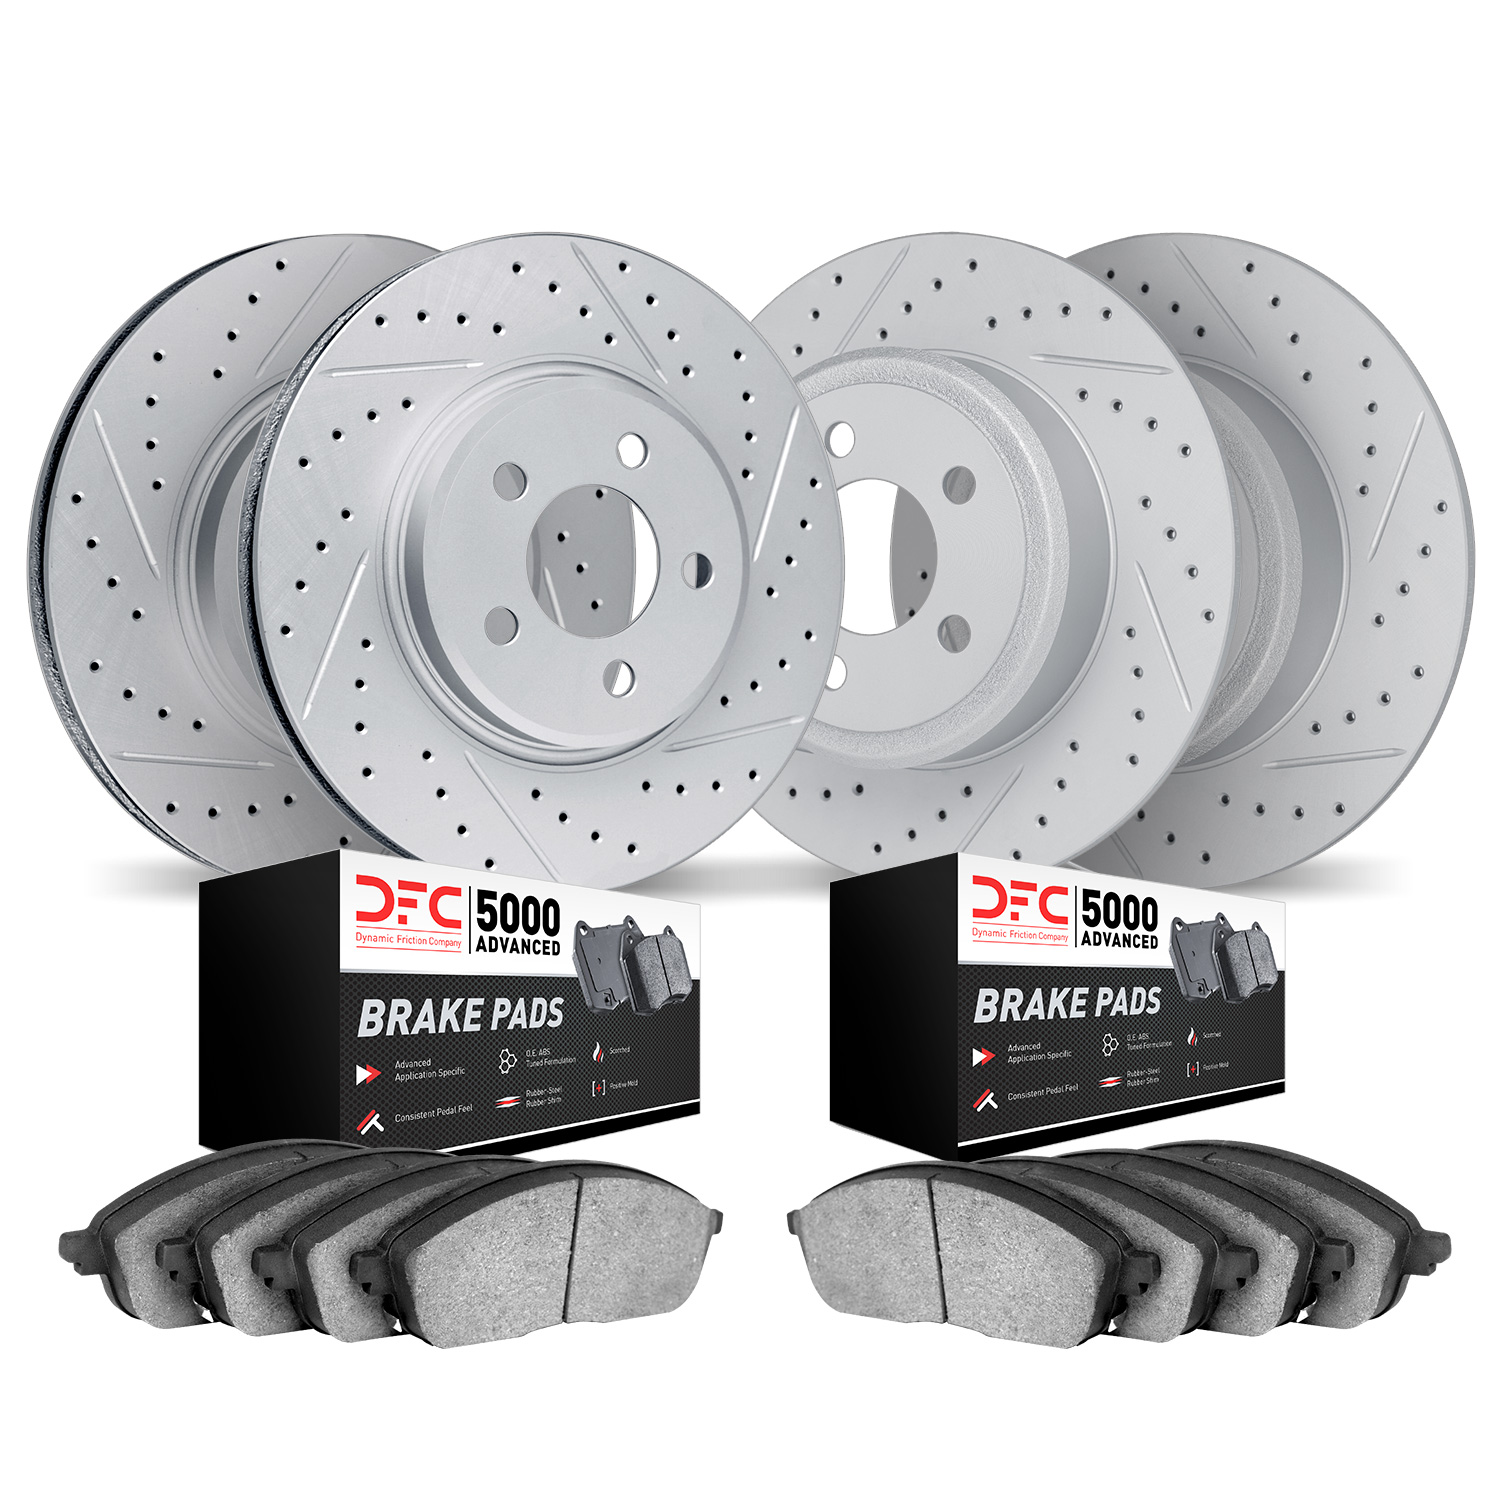 2504-76092 Geoperformance Drilled/Slotted Rotors w/5000 Advanced Brake Pads Kit, 2004-2004 Lexus/Toyota/Scion, Position: Front a